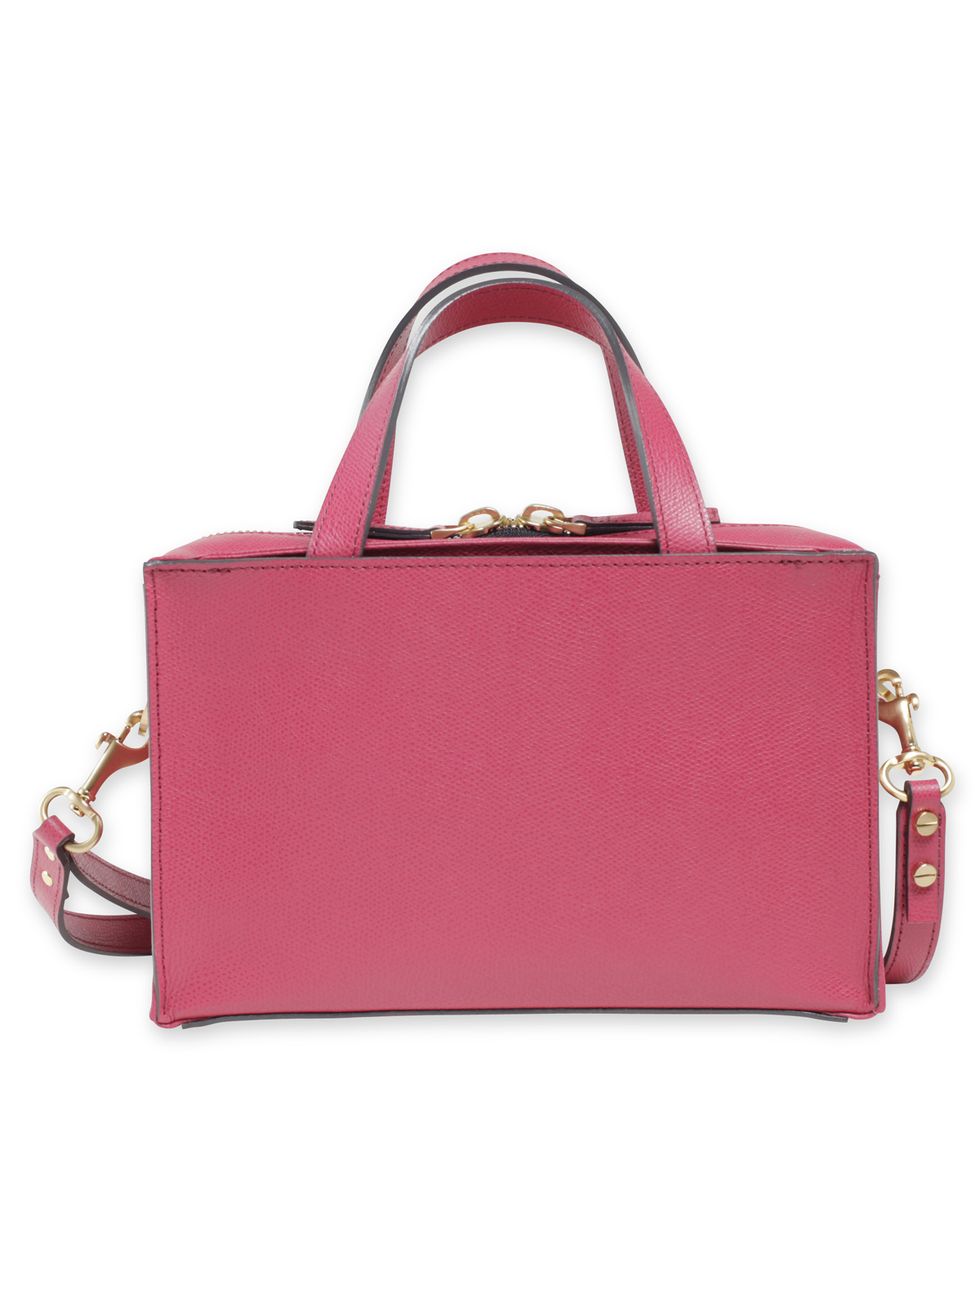 Handbag, Bag, Pink, Fashion accessory, Shoulder bag, Magenta, Leather, Luggage and bags, Material property, Hand luggage, 